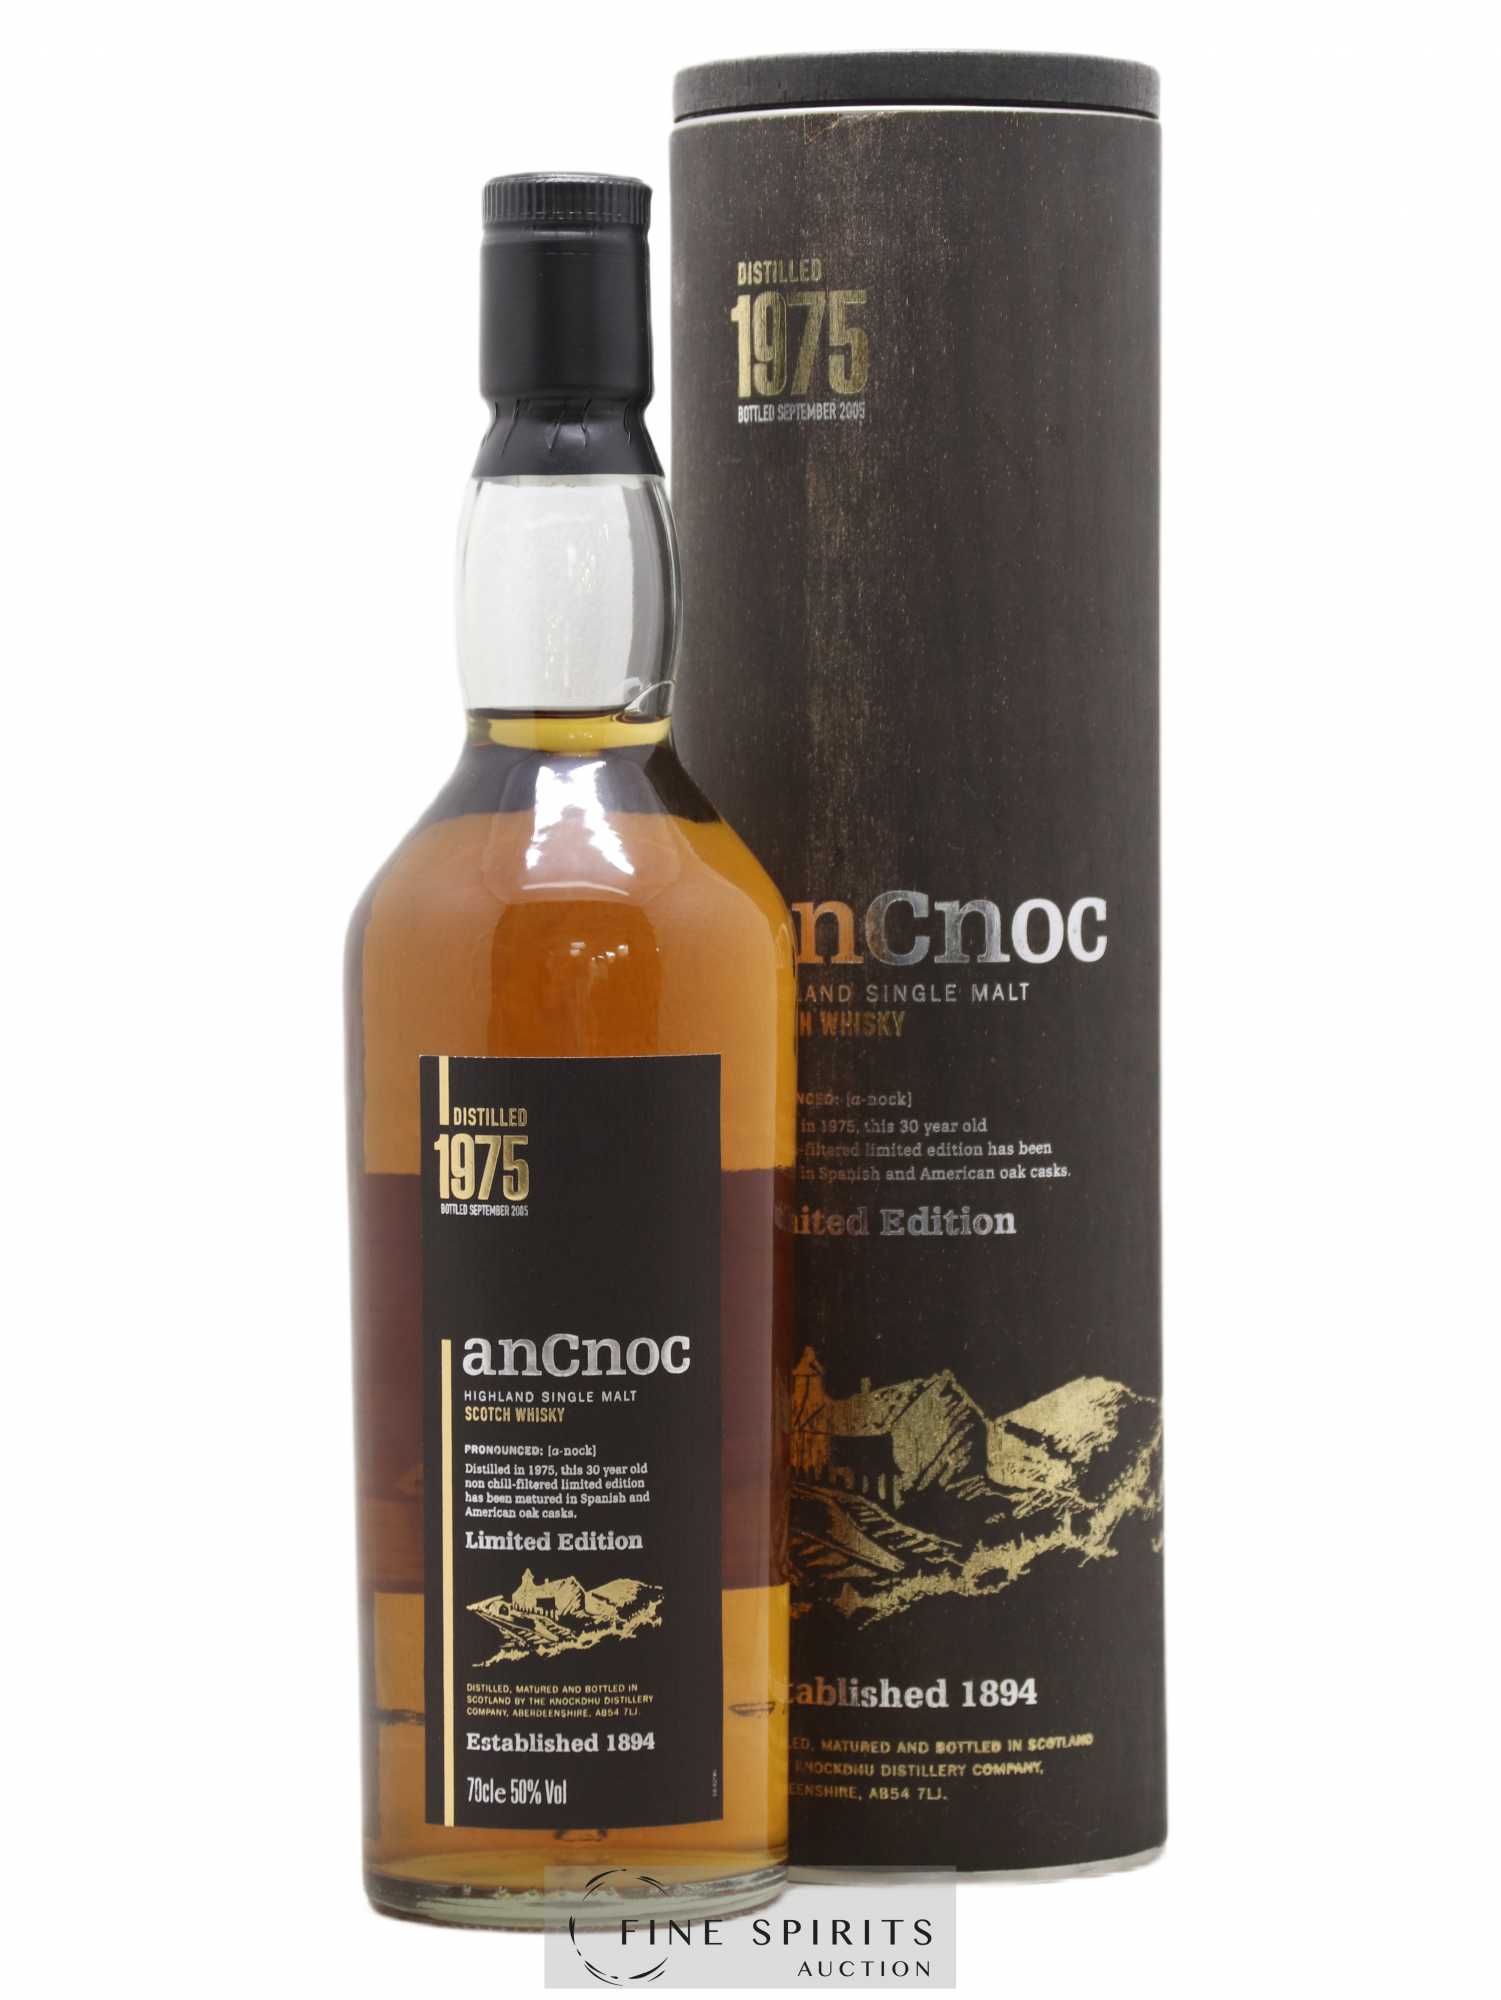 An Cnoc 30 years 1975 Of. bottled 2005 Limited Edition